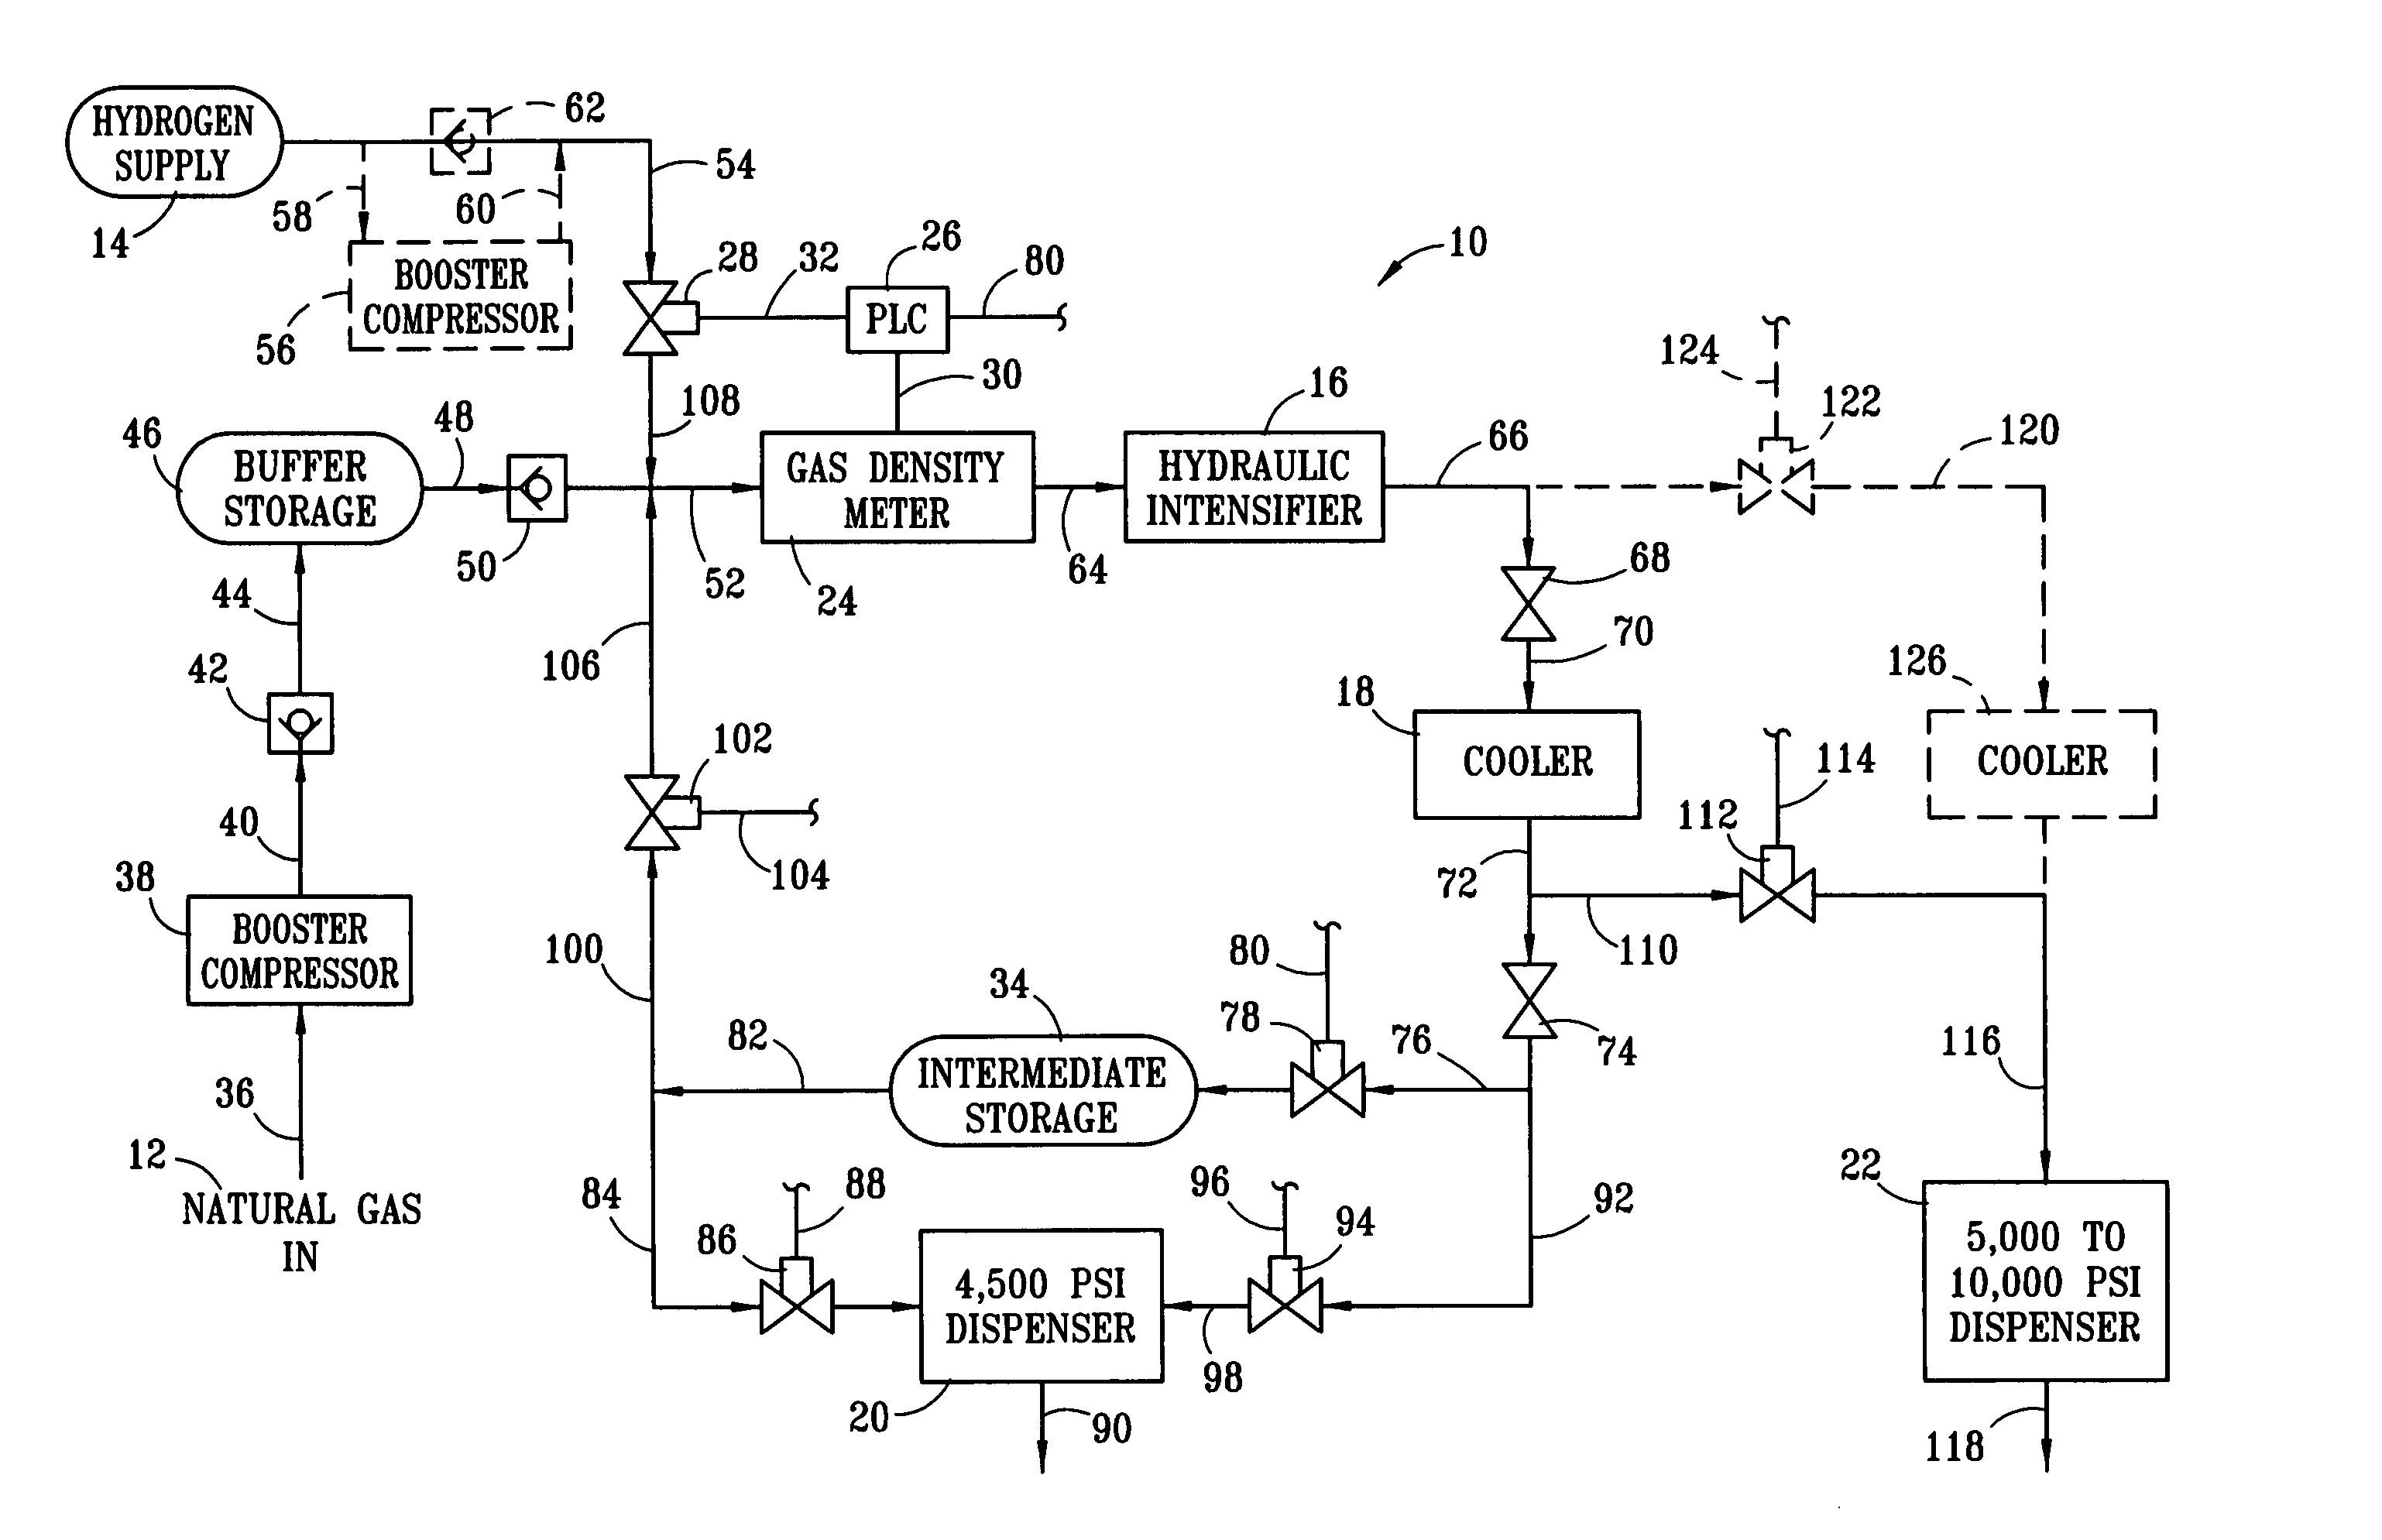 Dual-service system and method for compressing and dispensing natural gas and hydrogen